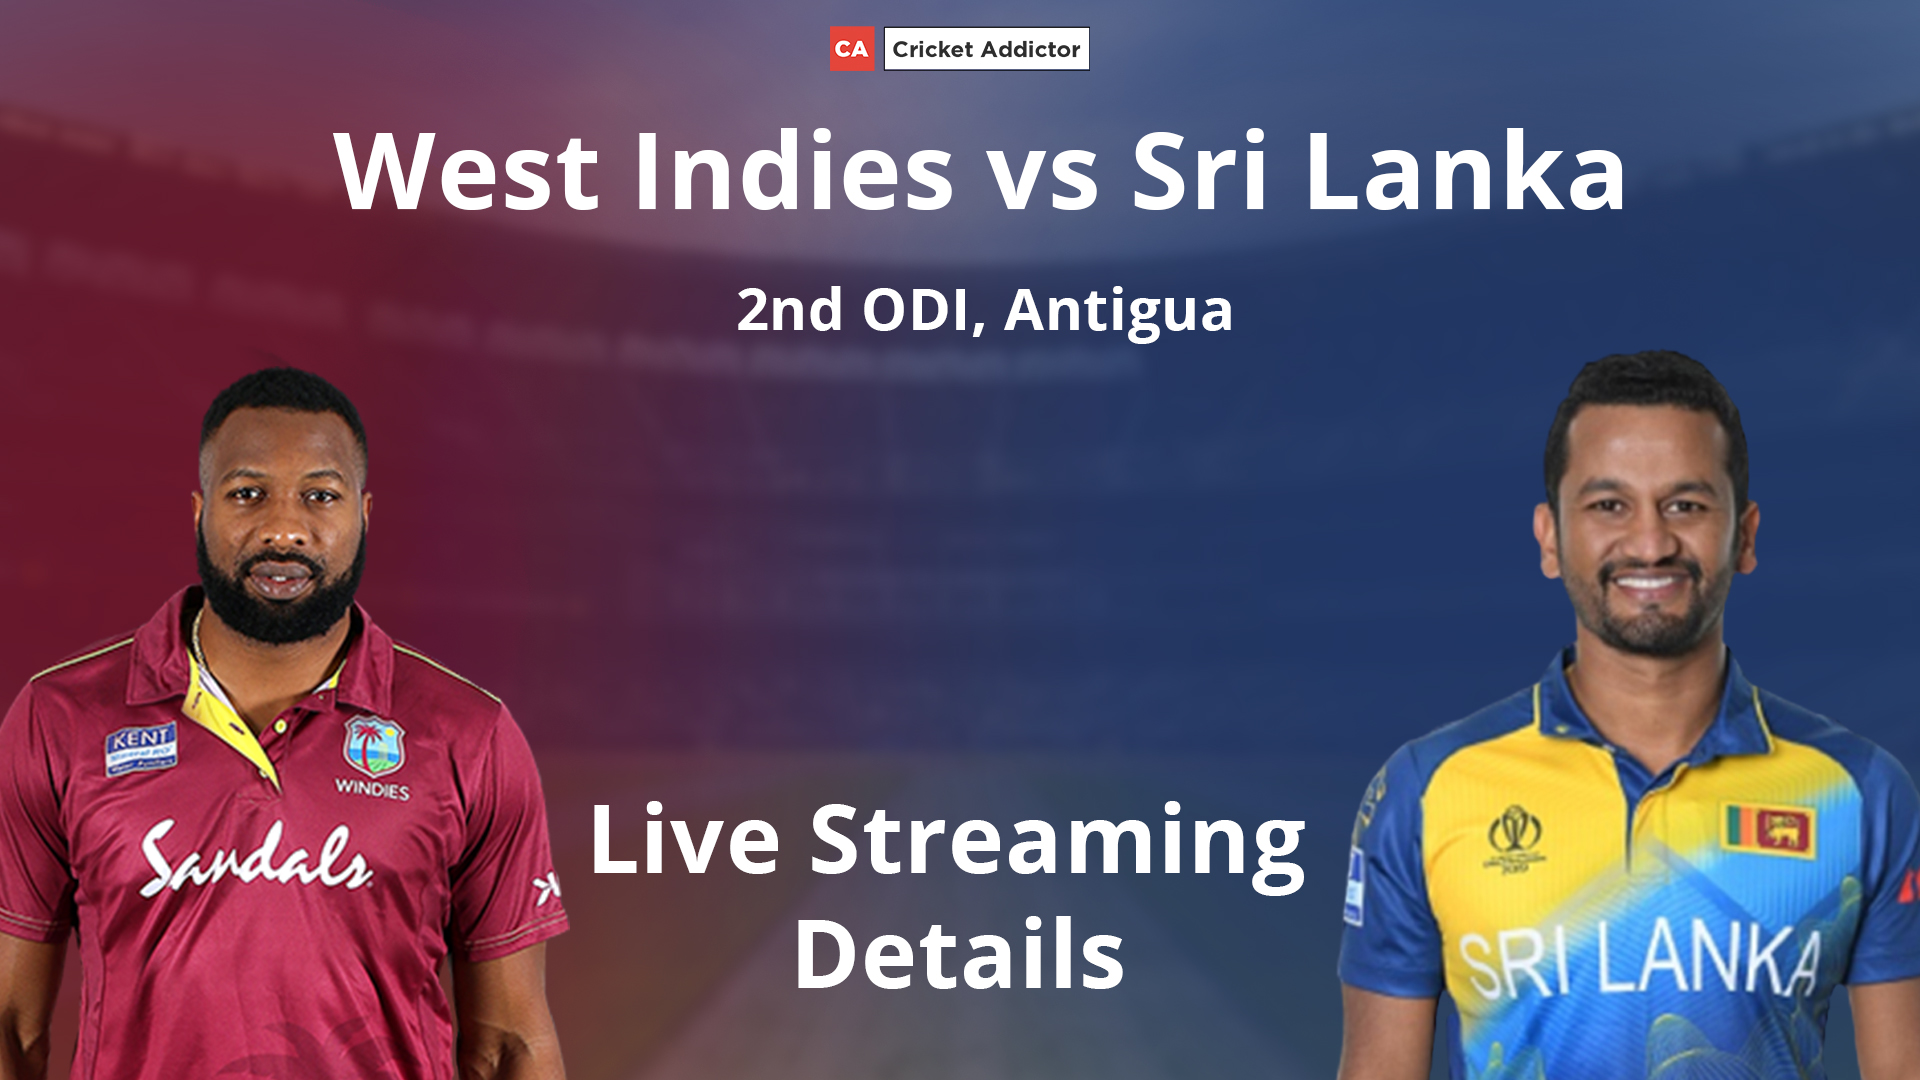 West Indies vs Sri Lanka 2021, 2nd ODI: When And Where To Watch, Live Streaming Details